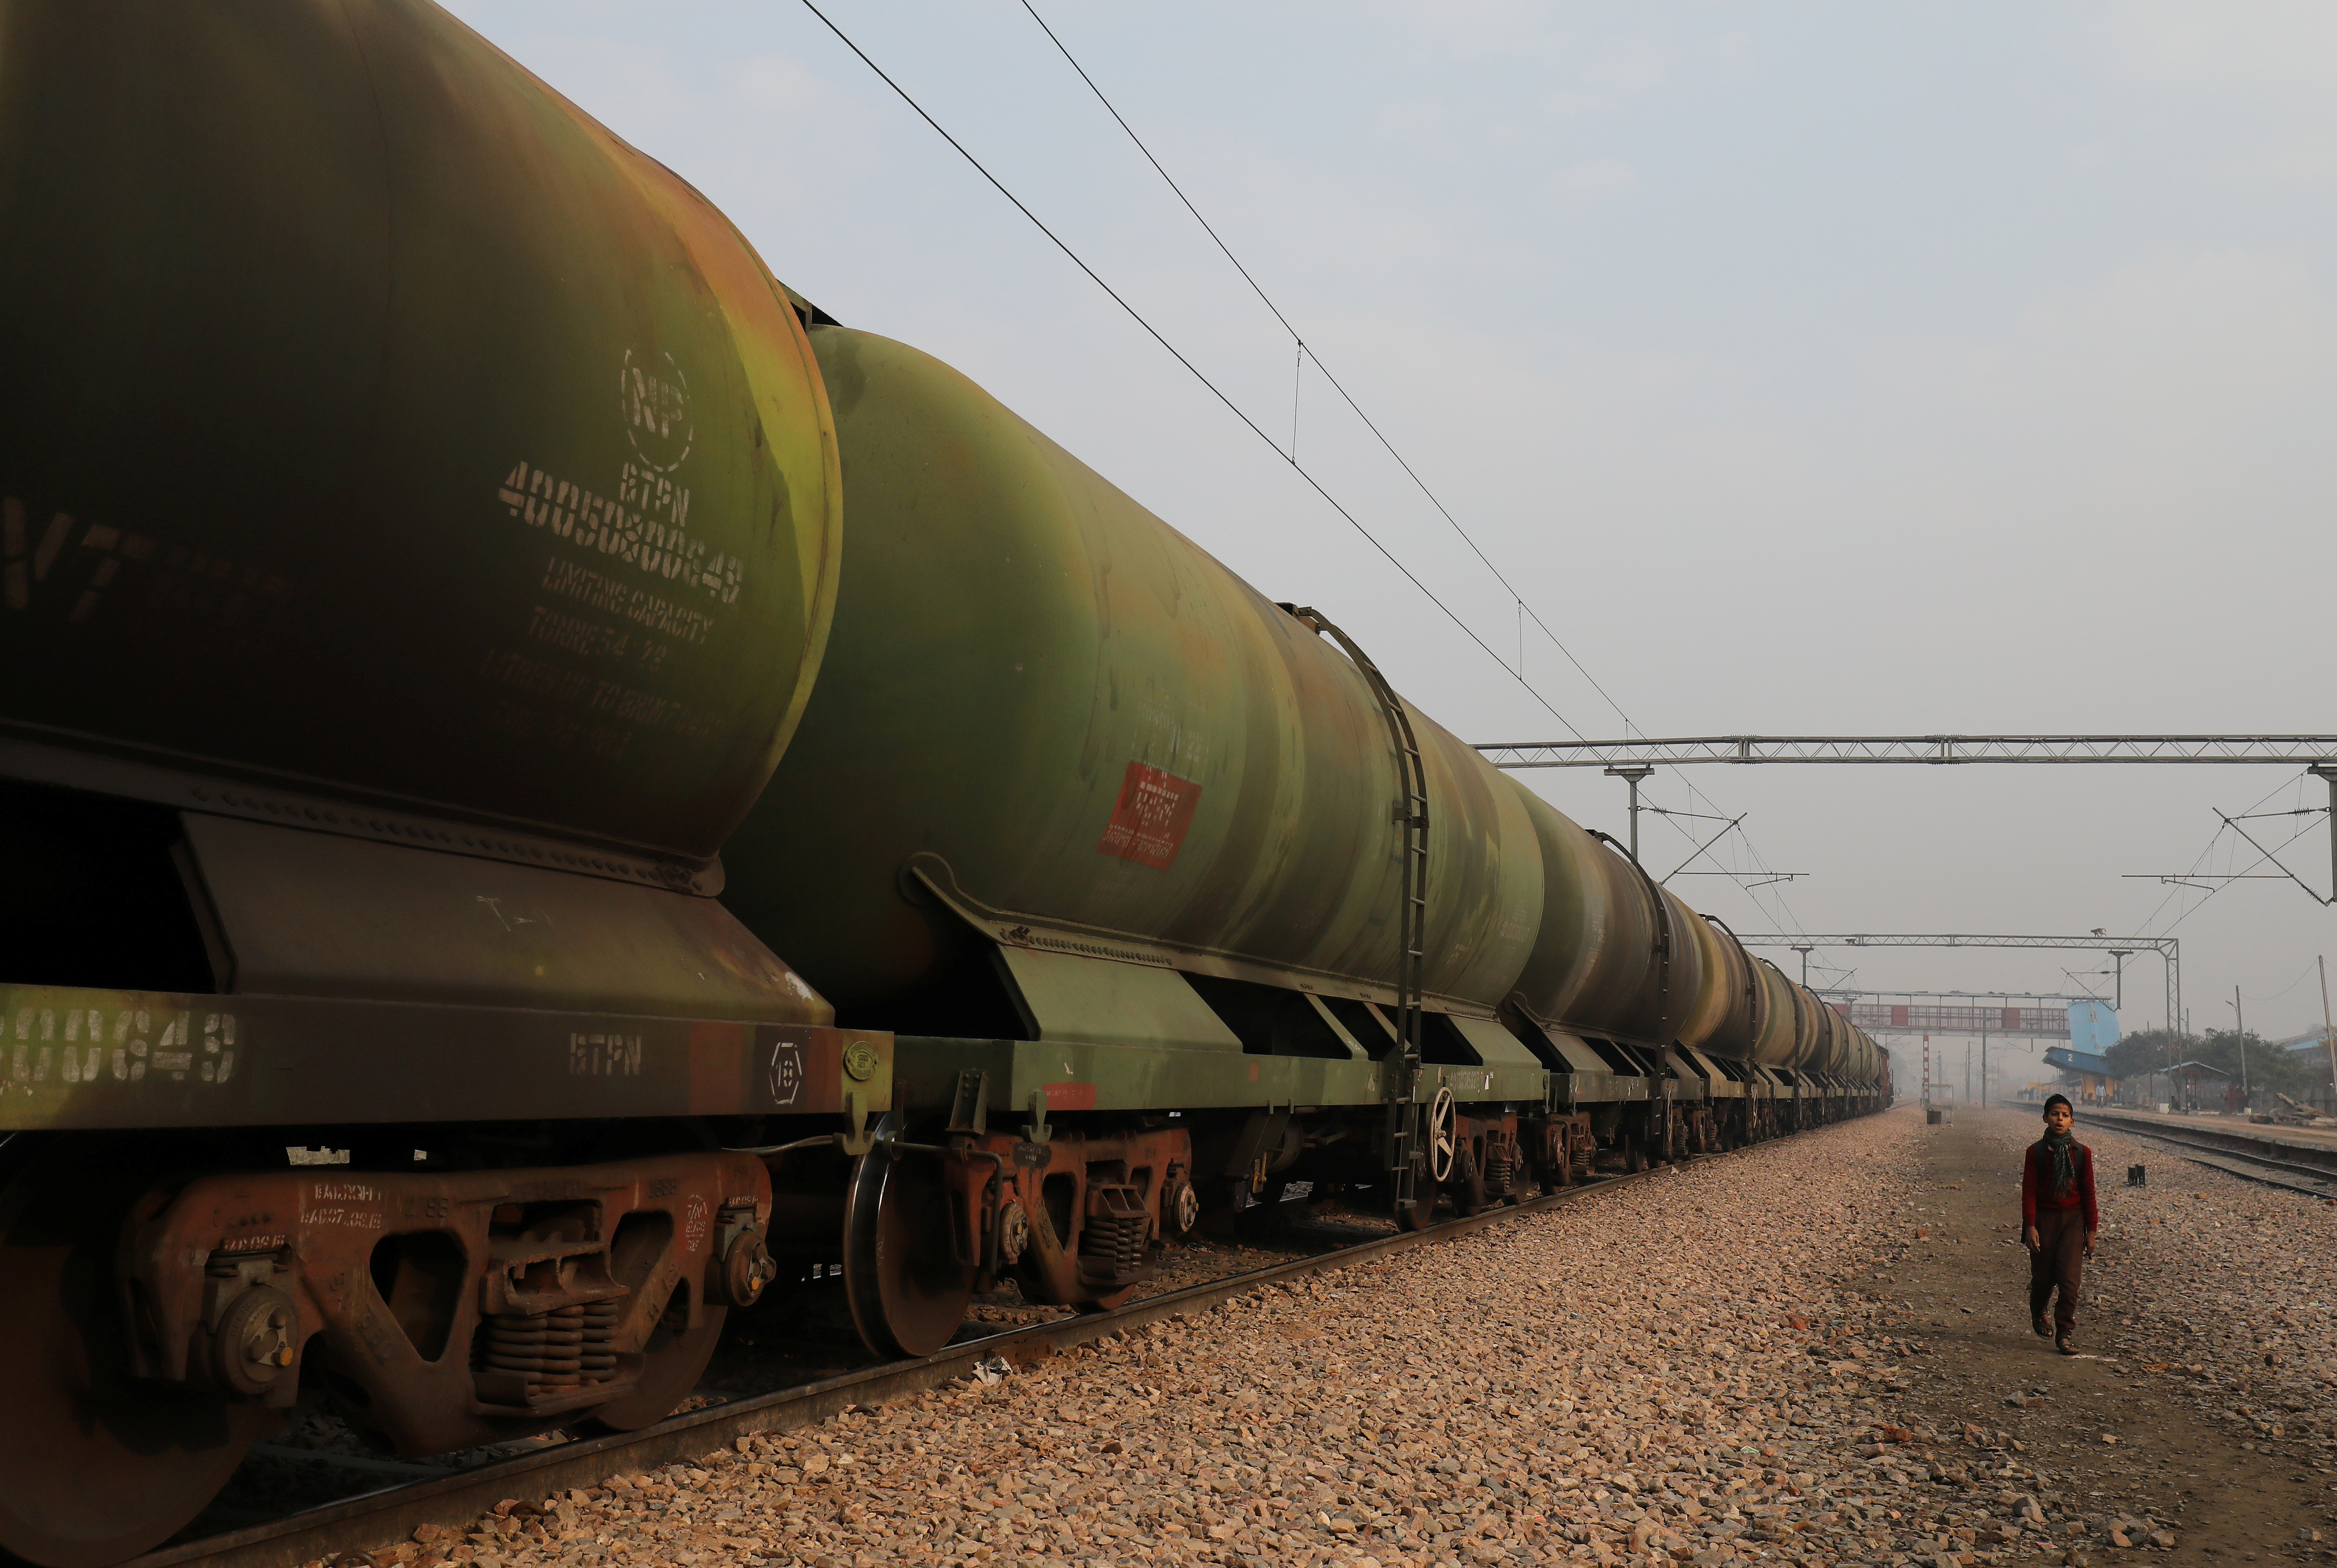 A boy walks past an oil tanker train stationed at a railway station in Ghaziabad